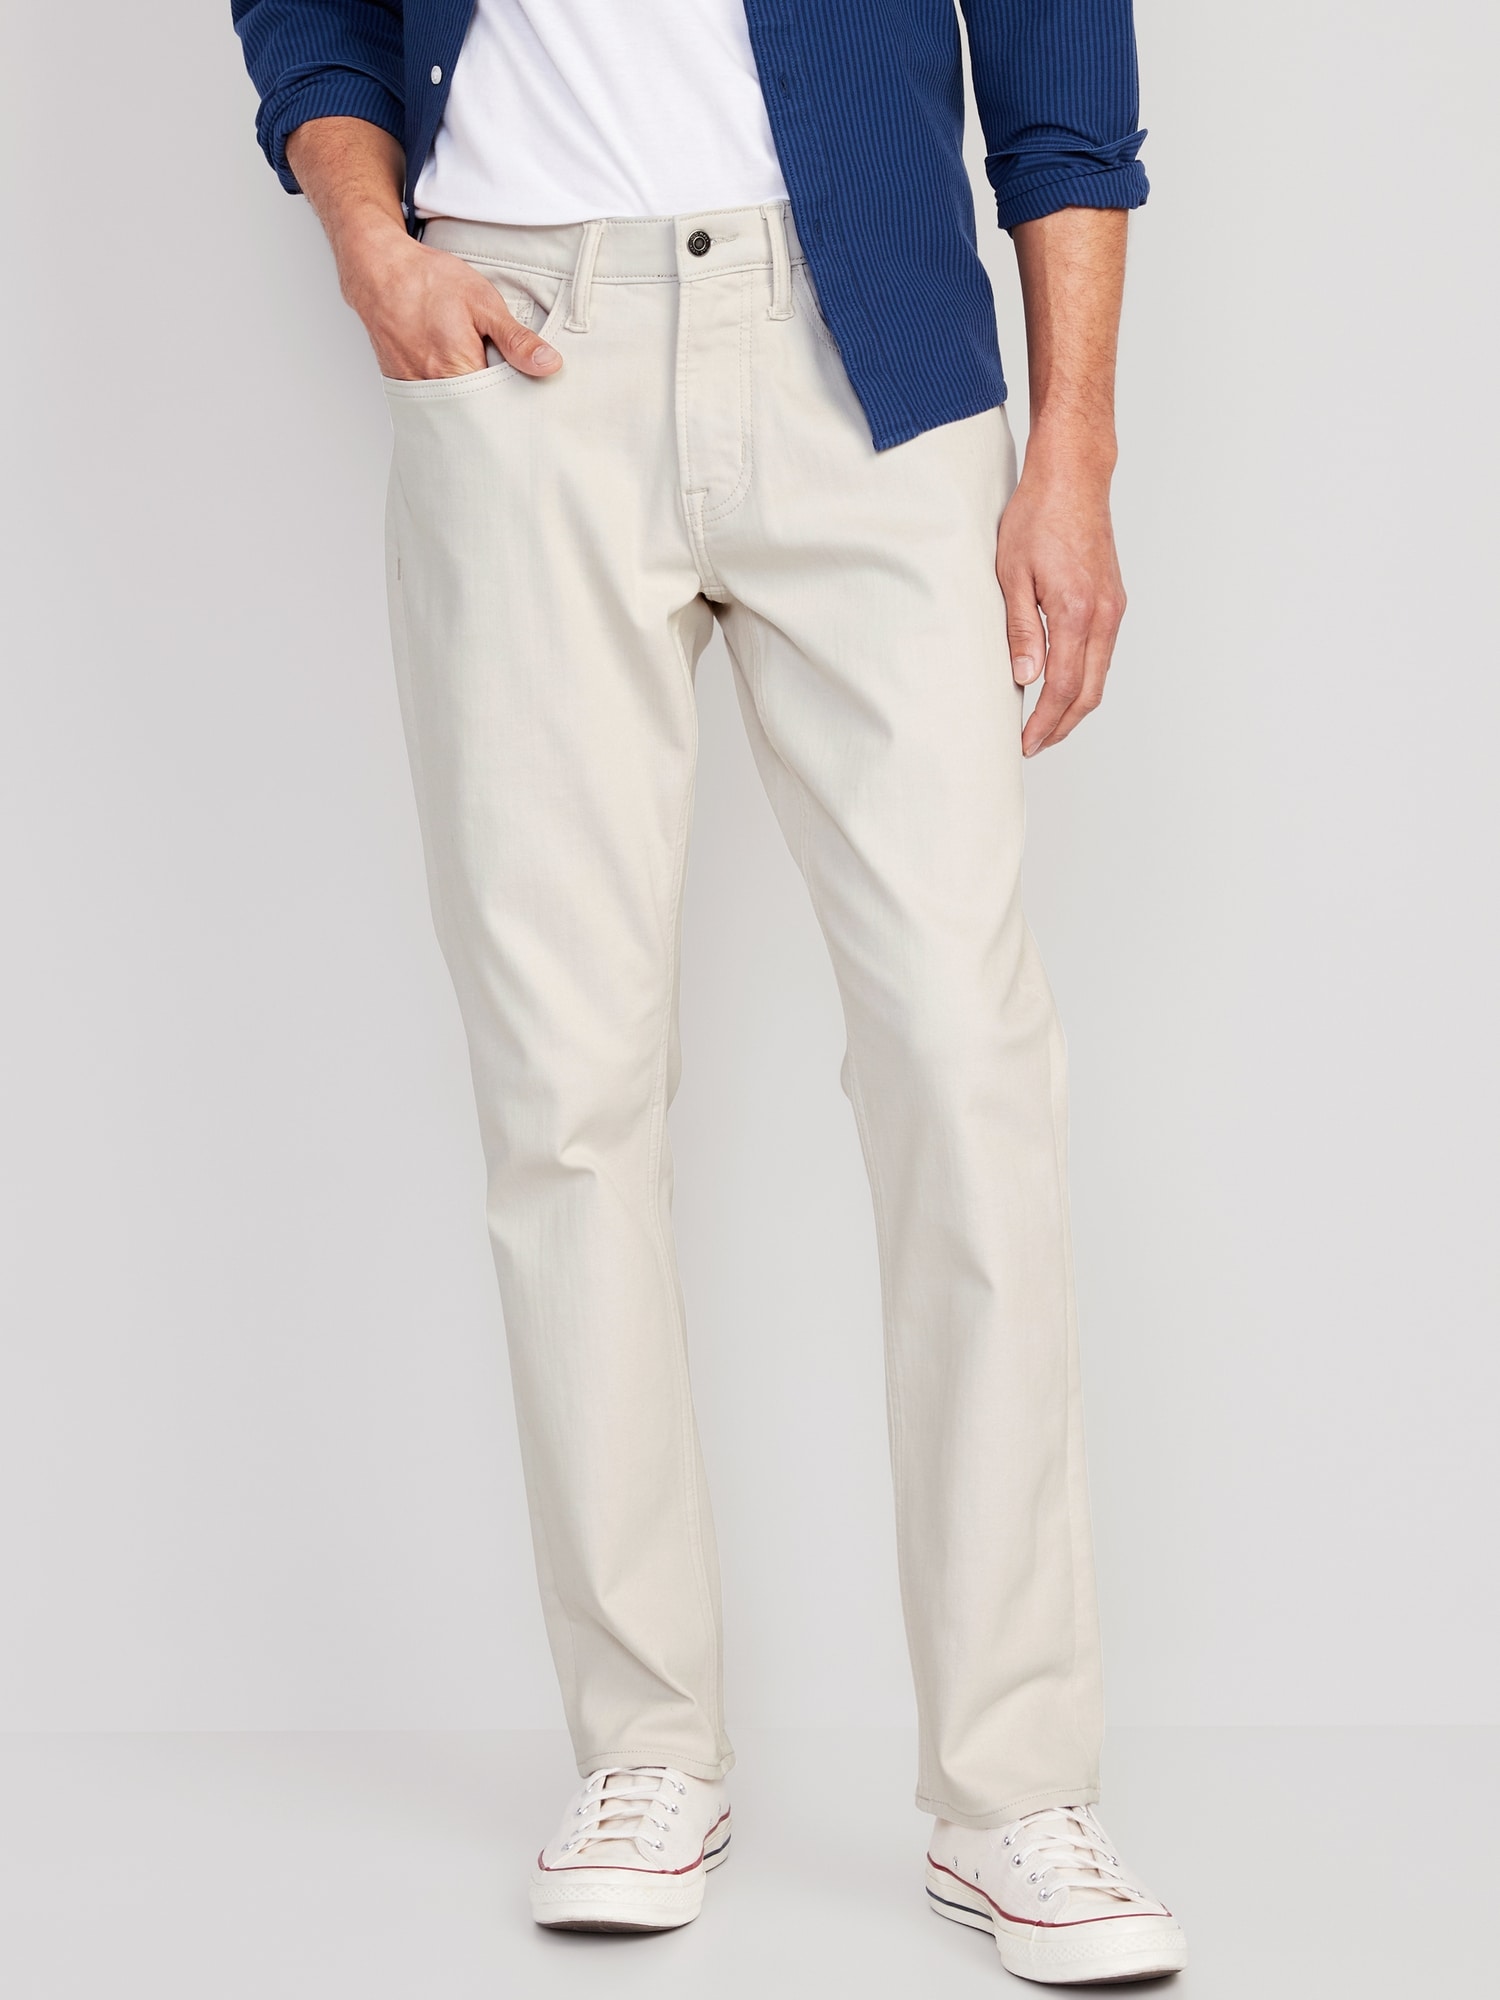 Loose Ultimate BuiltIn Flex Chino Pants for Men  Old Navy